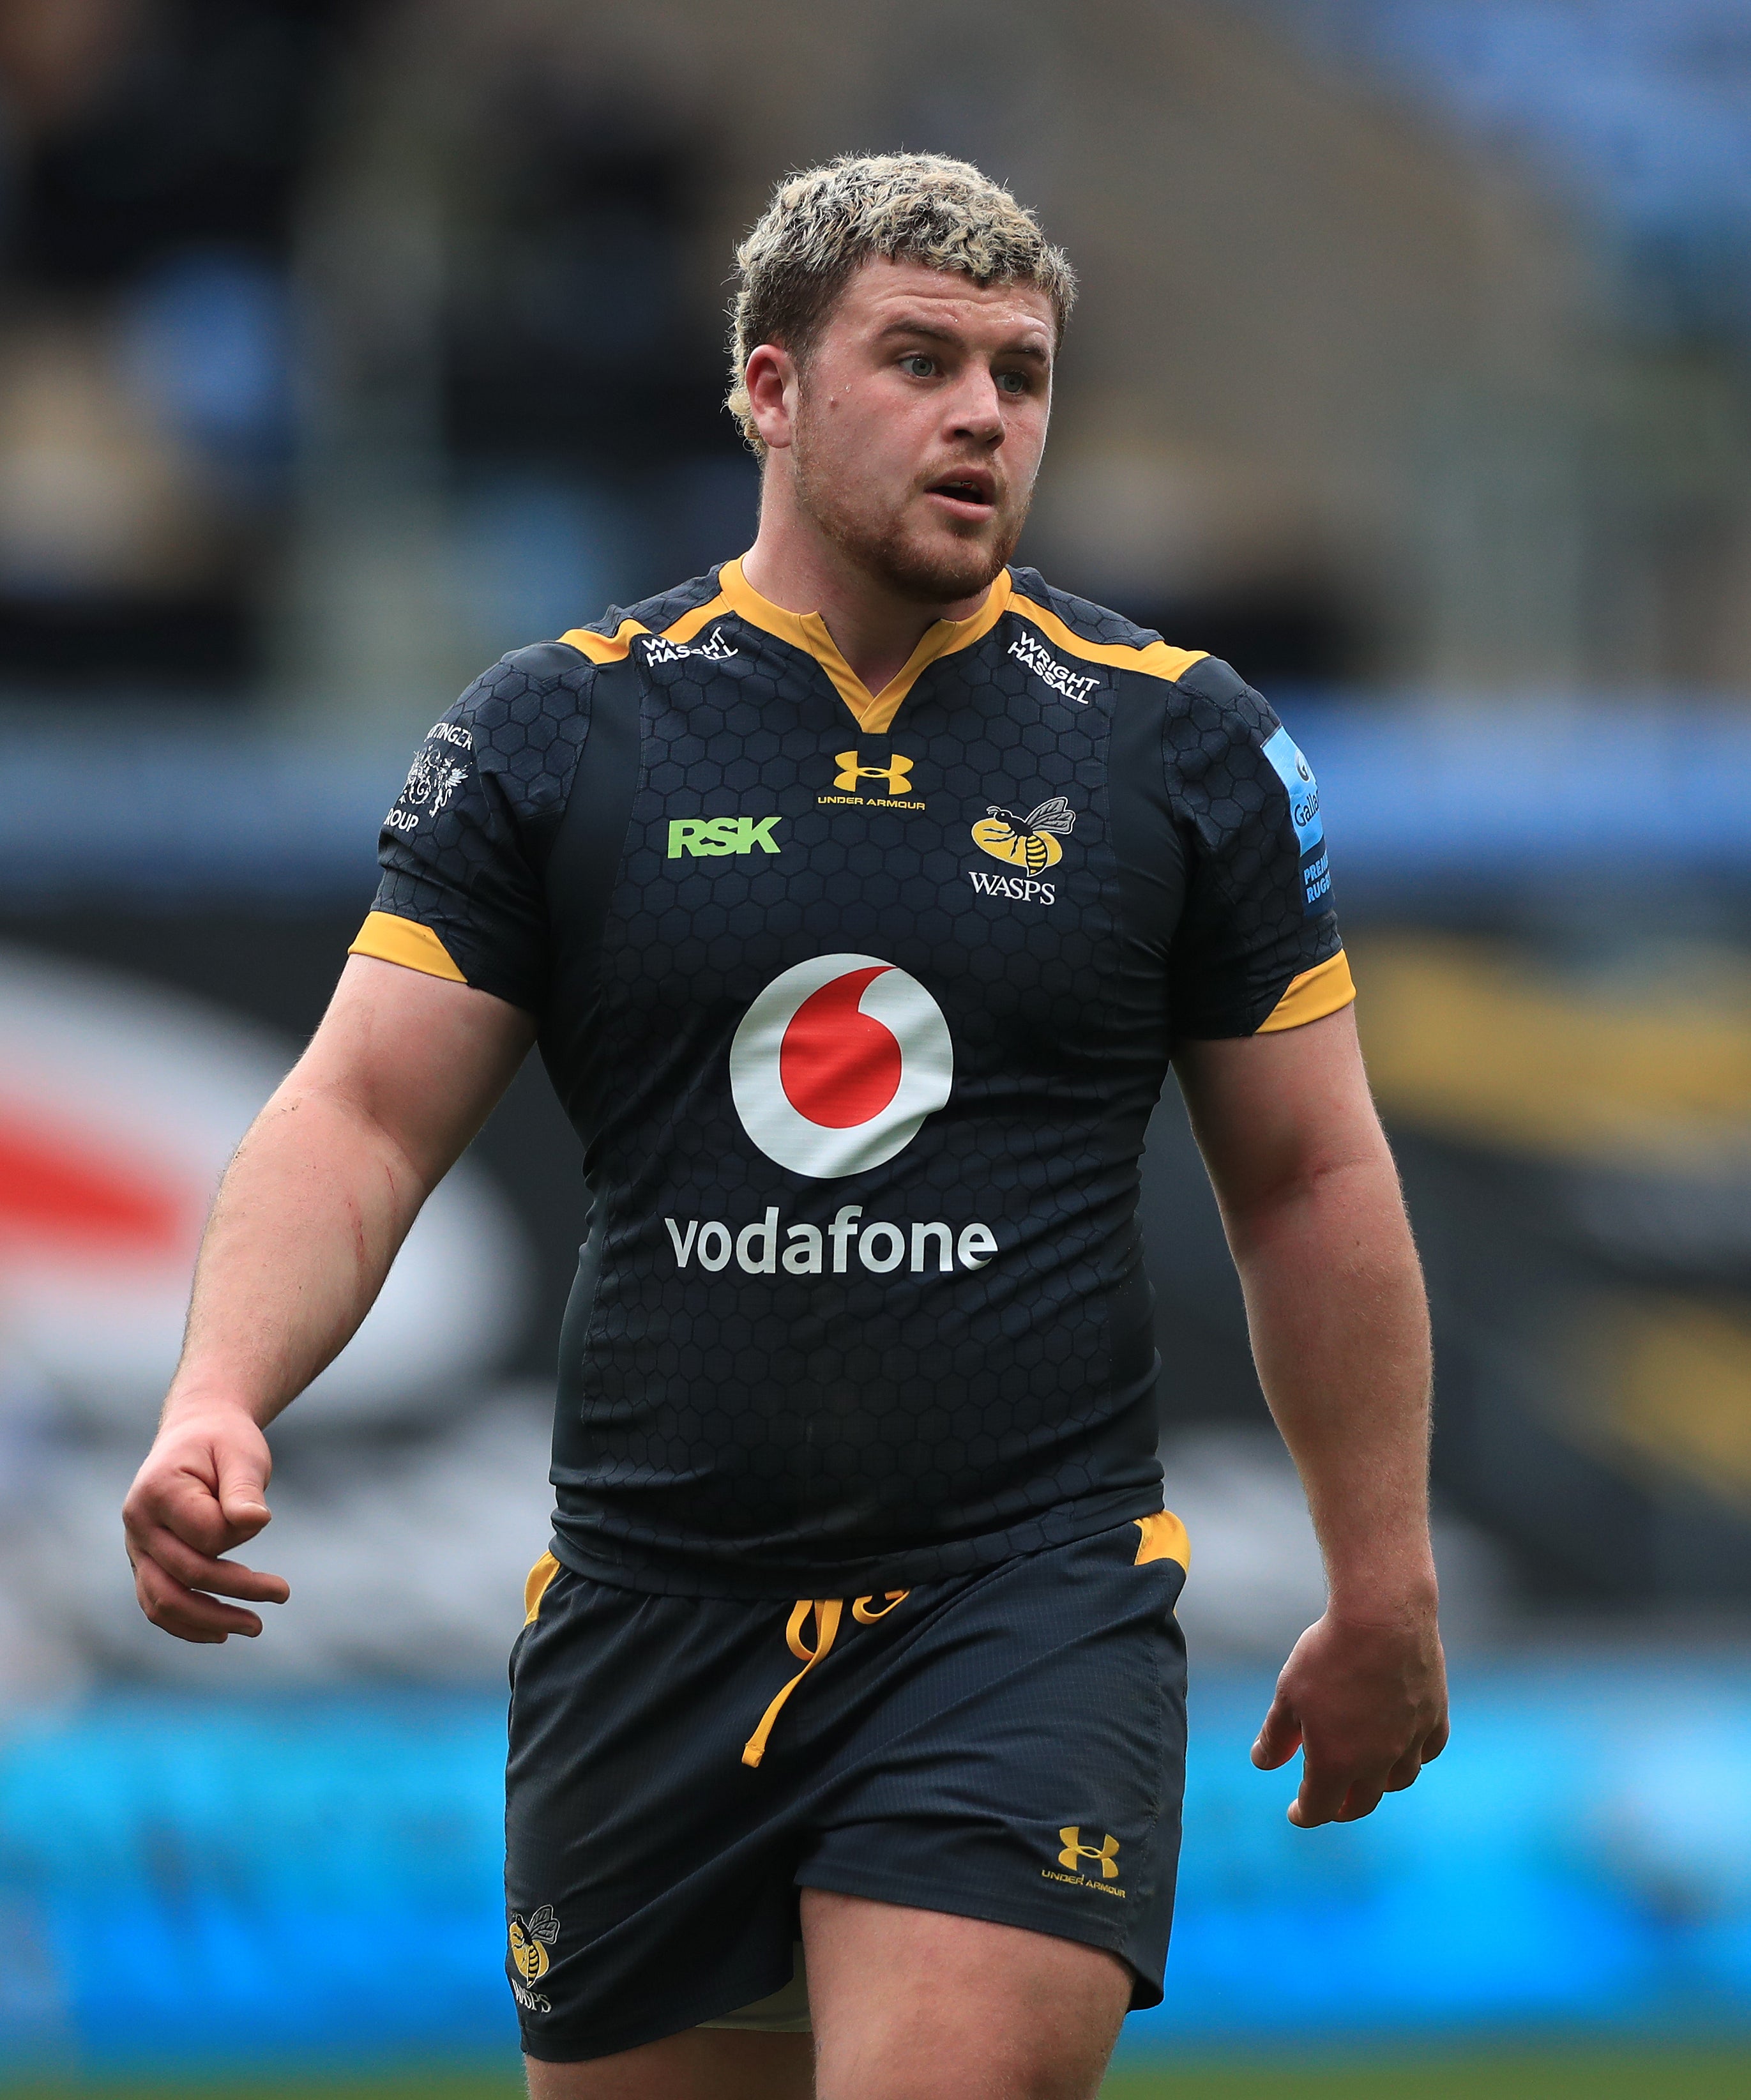 Wasps back-row forward Alfie Barbeary has had his share of injuries (Mike Egerton/PA)